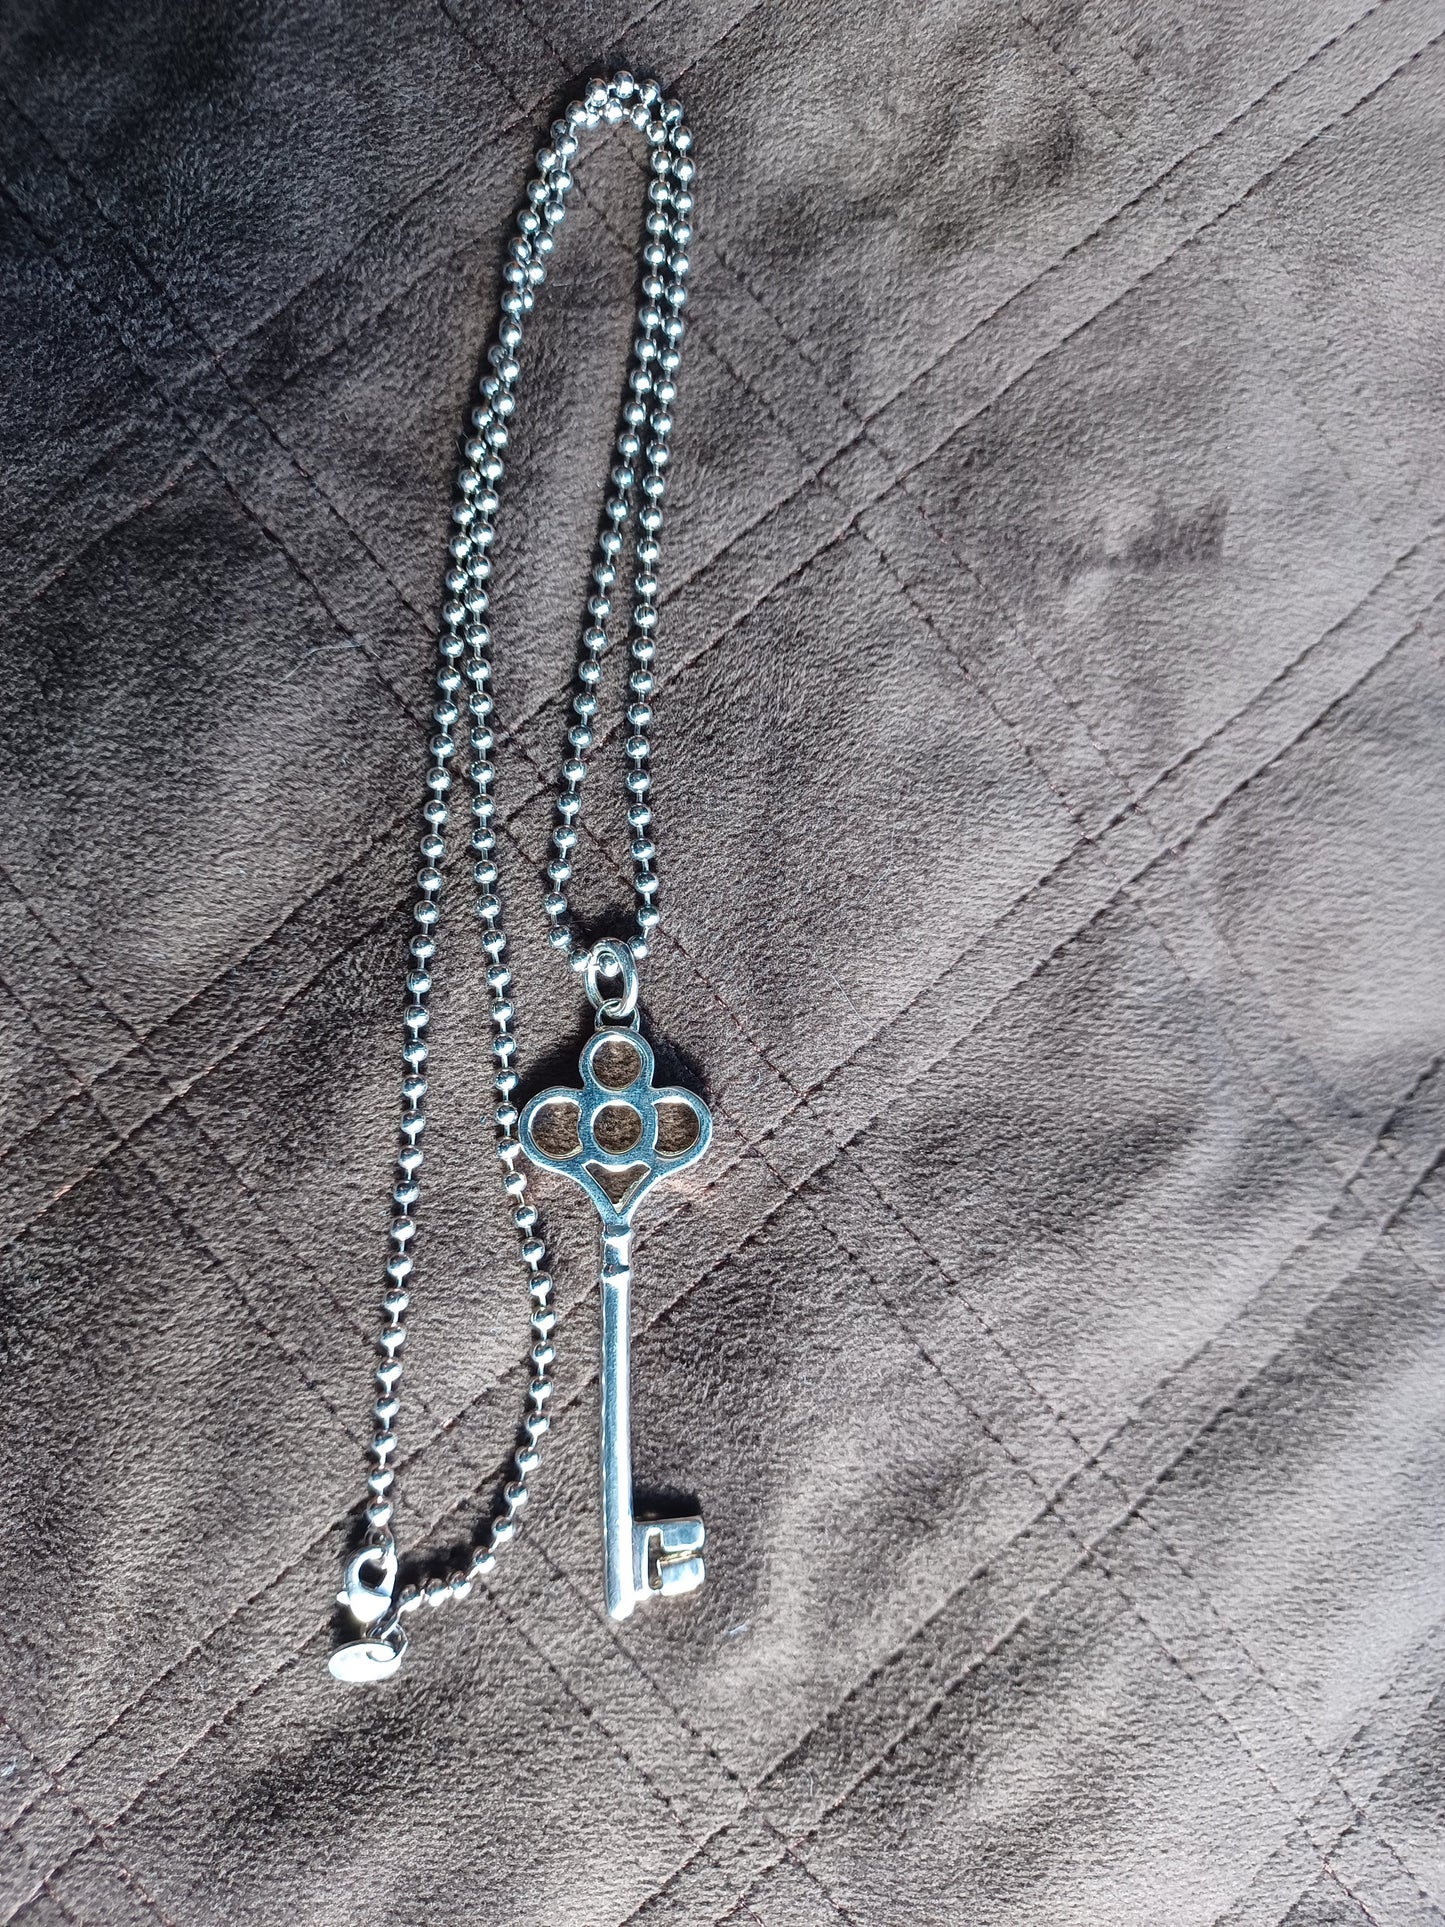 Tiffany necklace and pendant